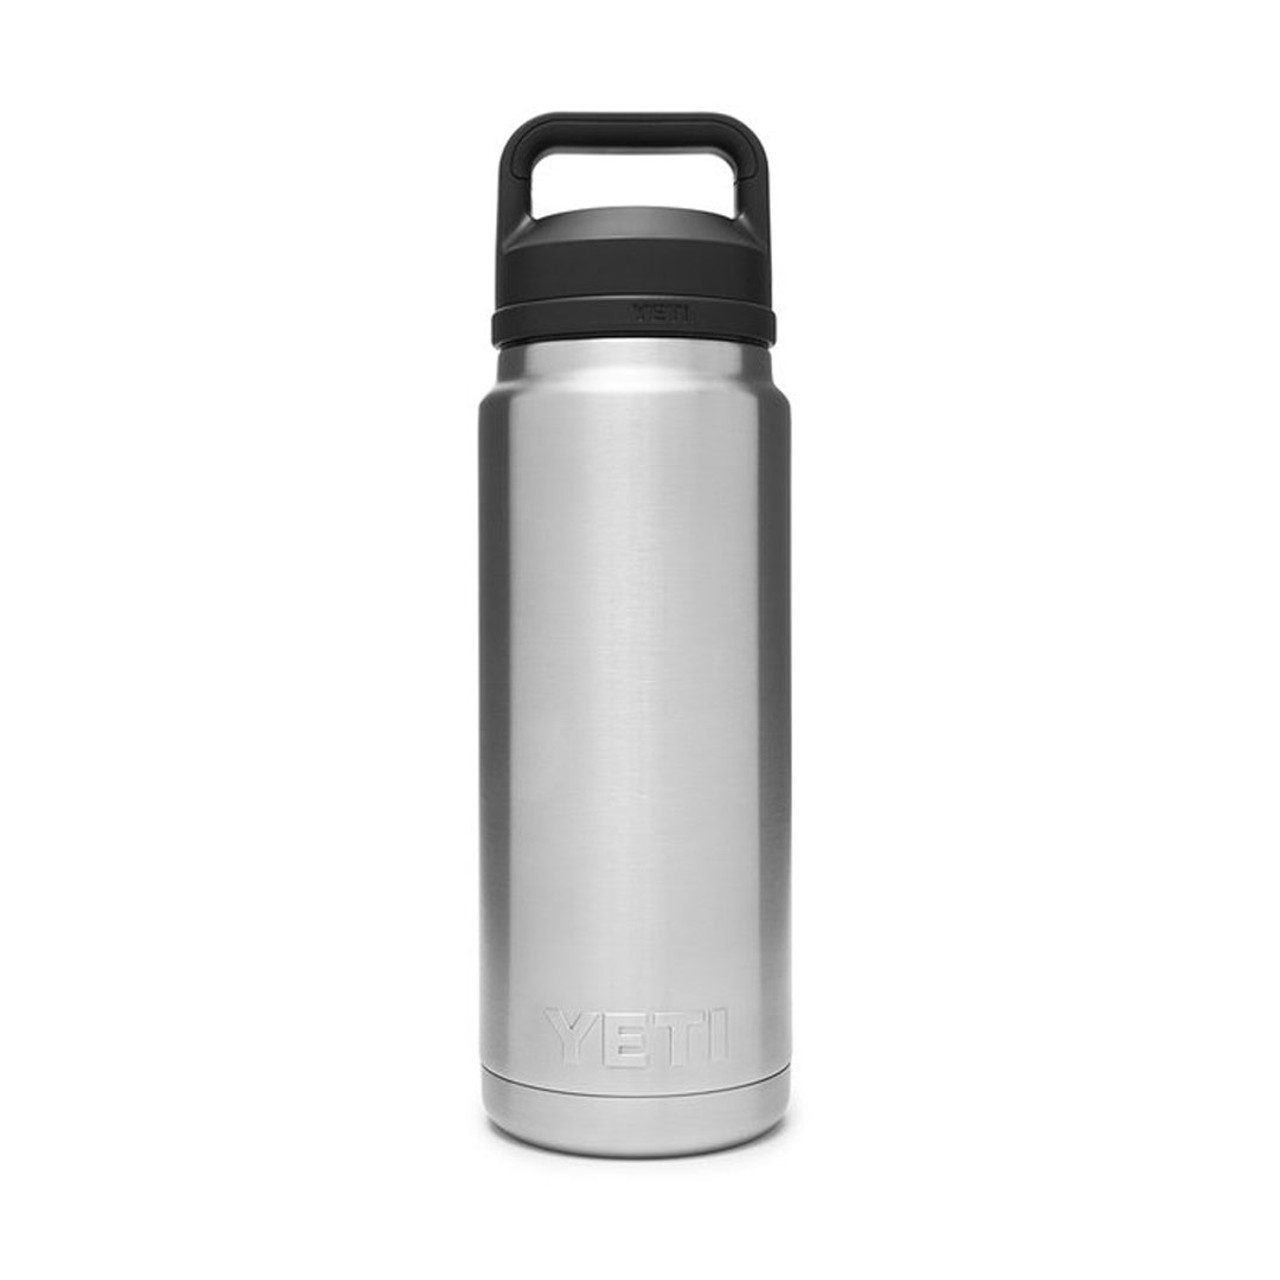 https://cdn11.bigcommerce.com/s-ppsyskcavg/images/stencil/1280x1280/products/39320/125412/191416-Chug-Inline-Campaign-Website-Assets-Rambler-26oz-Bottle-Chug-Cap-Stainless-Front-1680x1024__47316.1593462693.jpg?c=2?imbypass=on